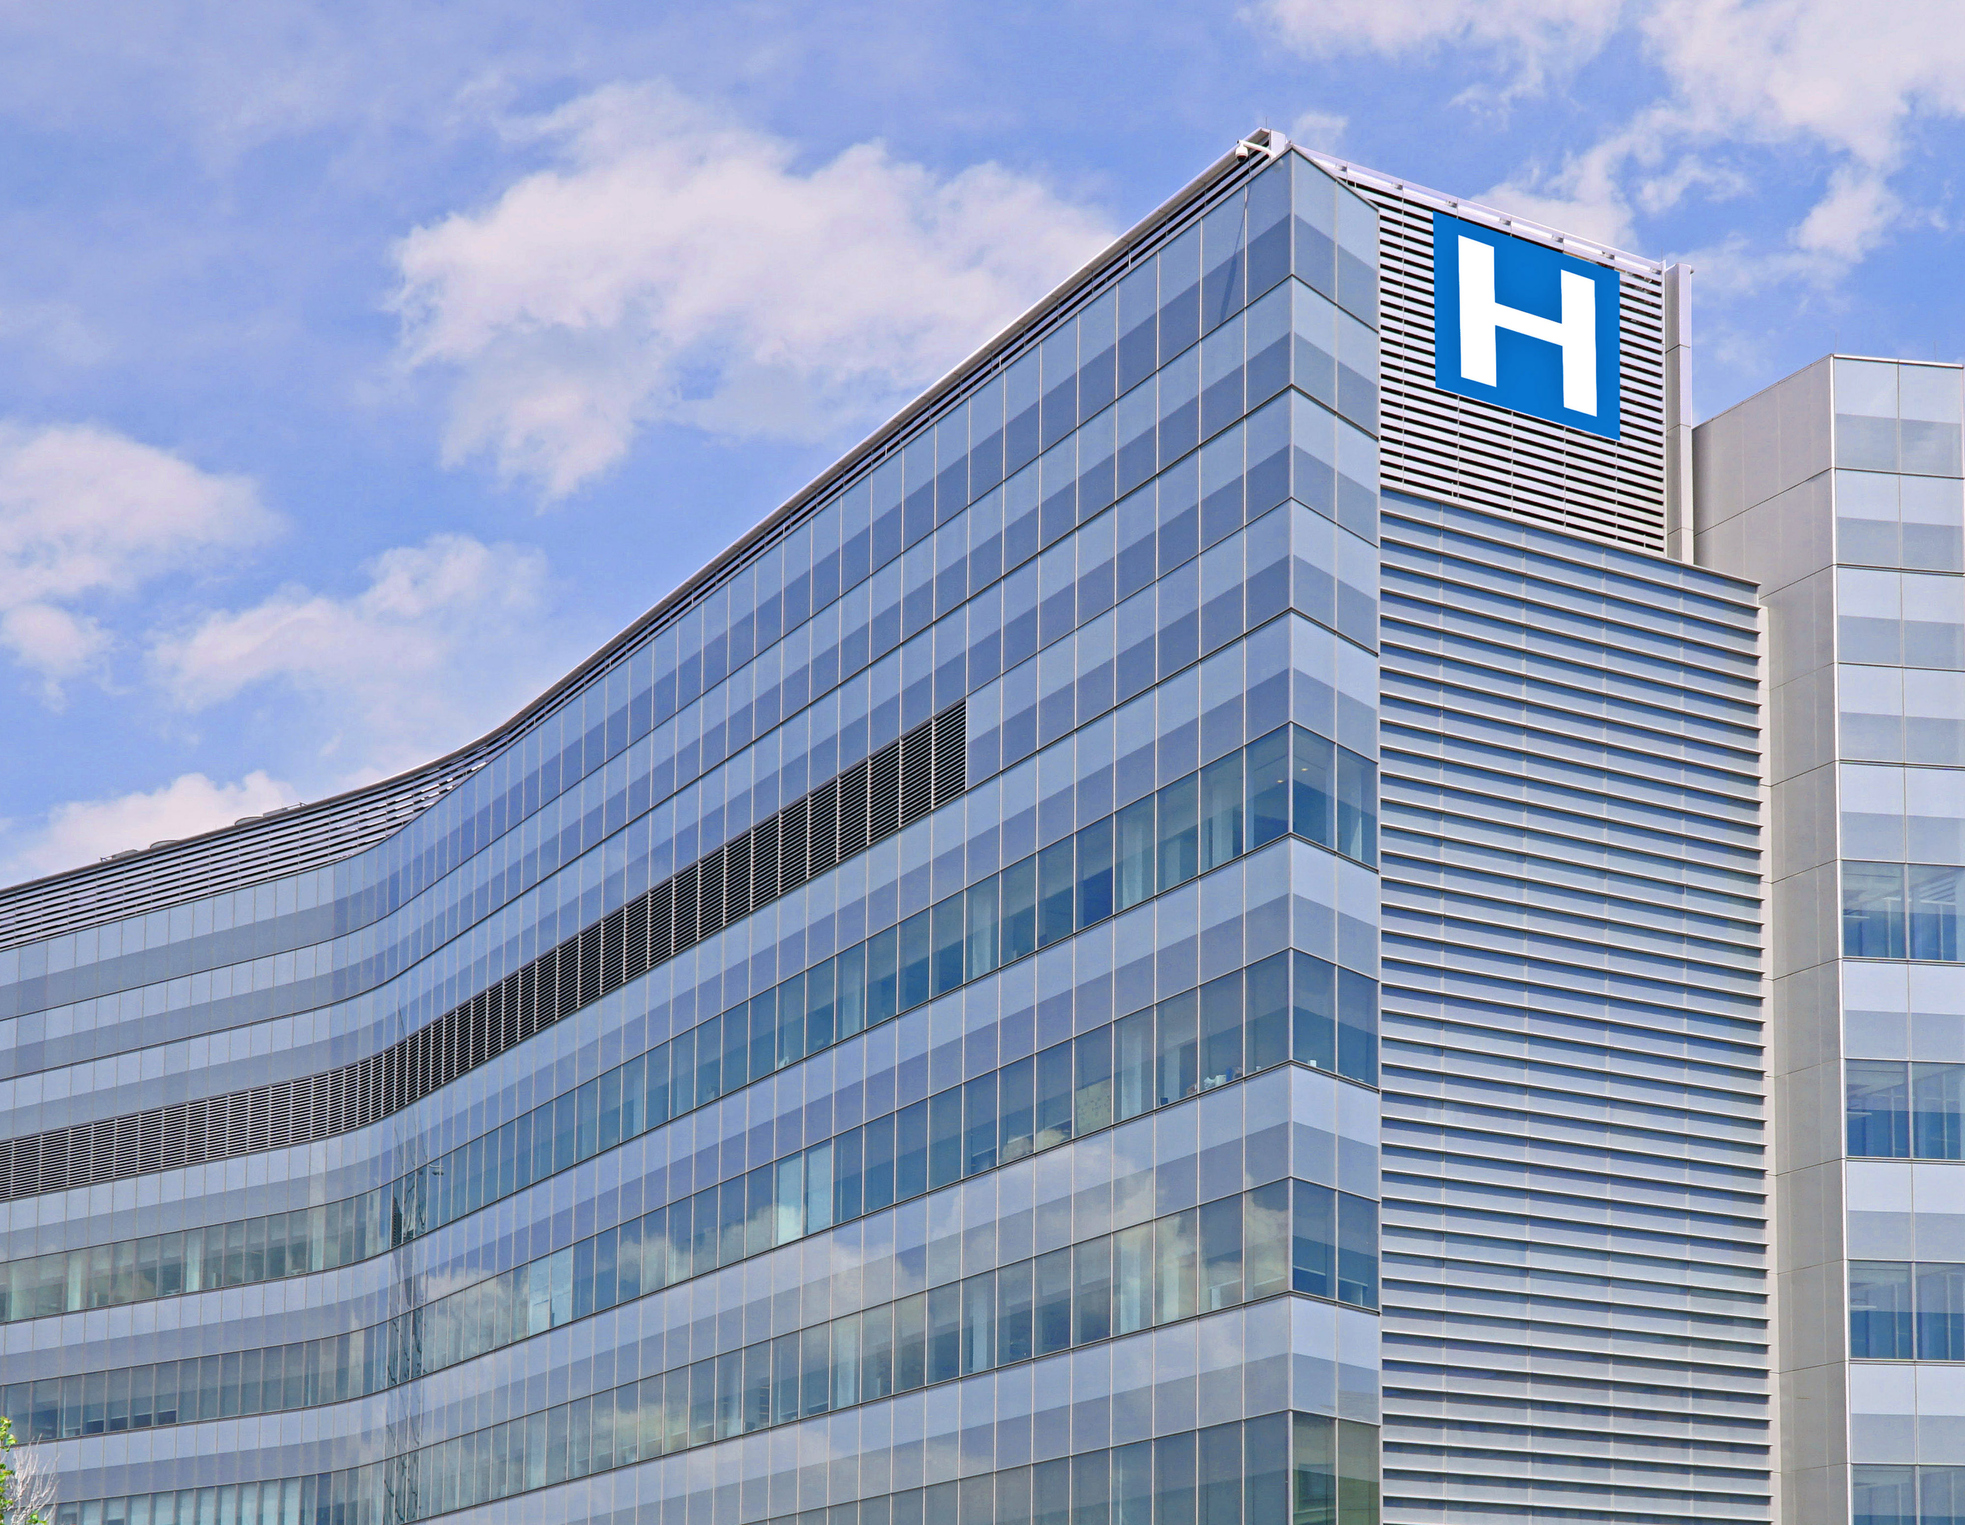 Building with large H sign for hospital XINSURANCE